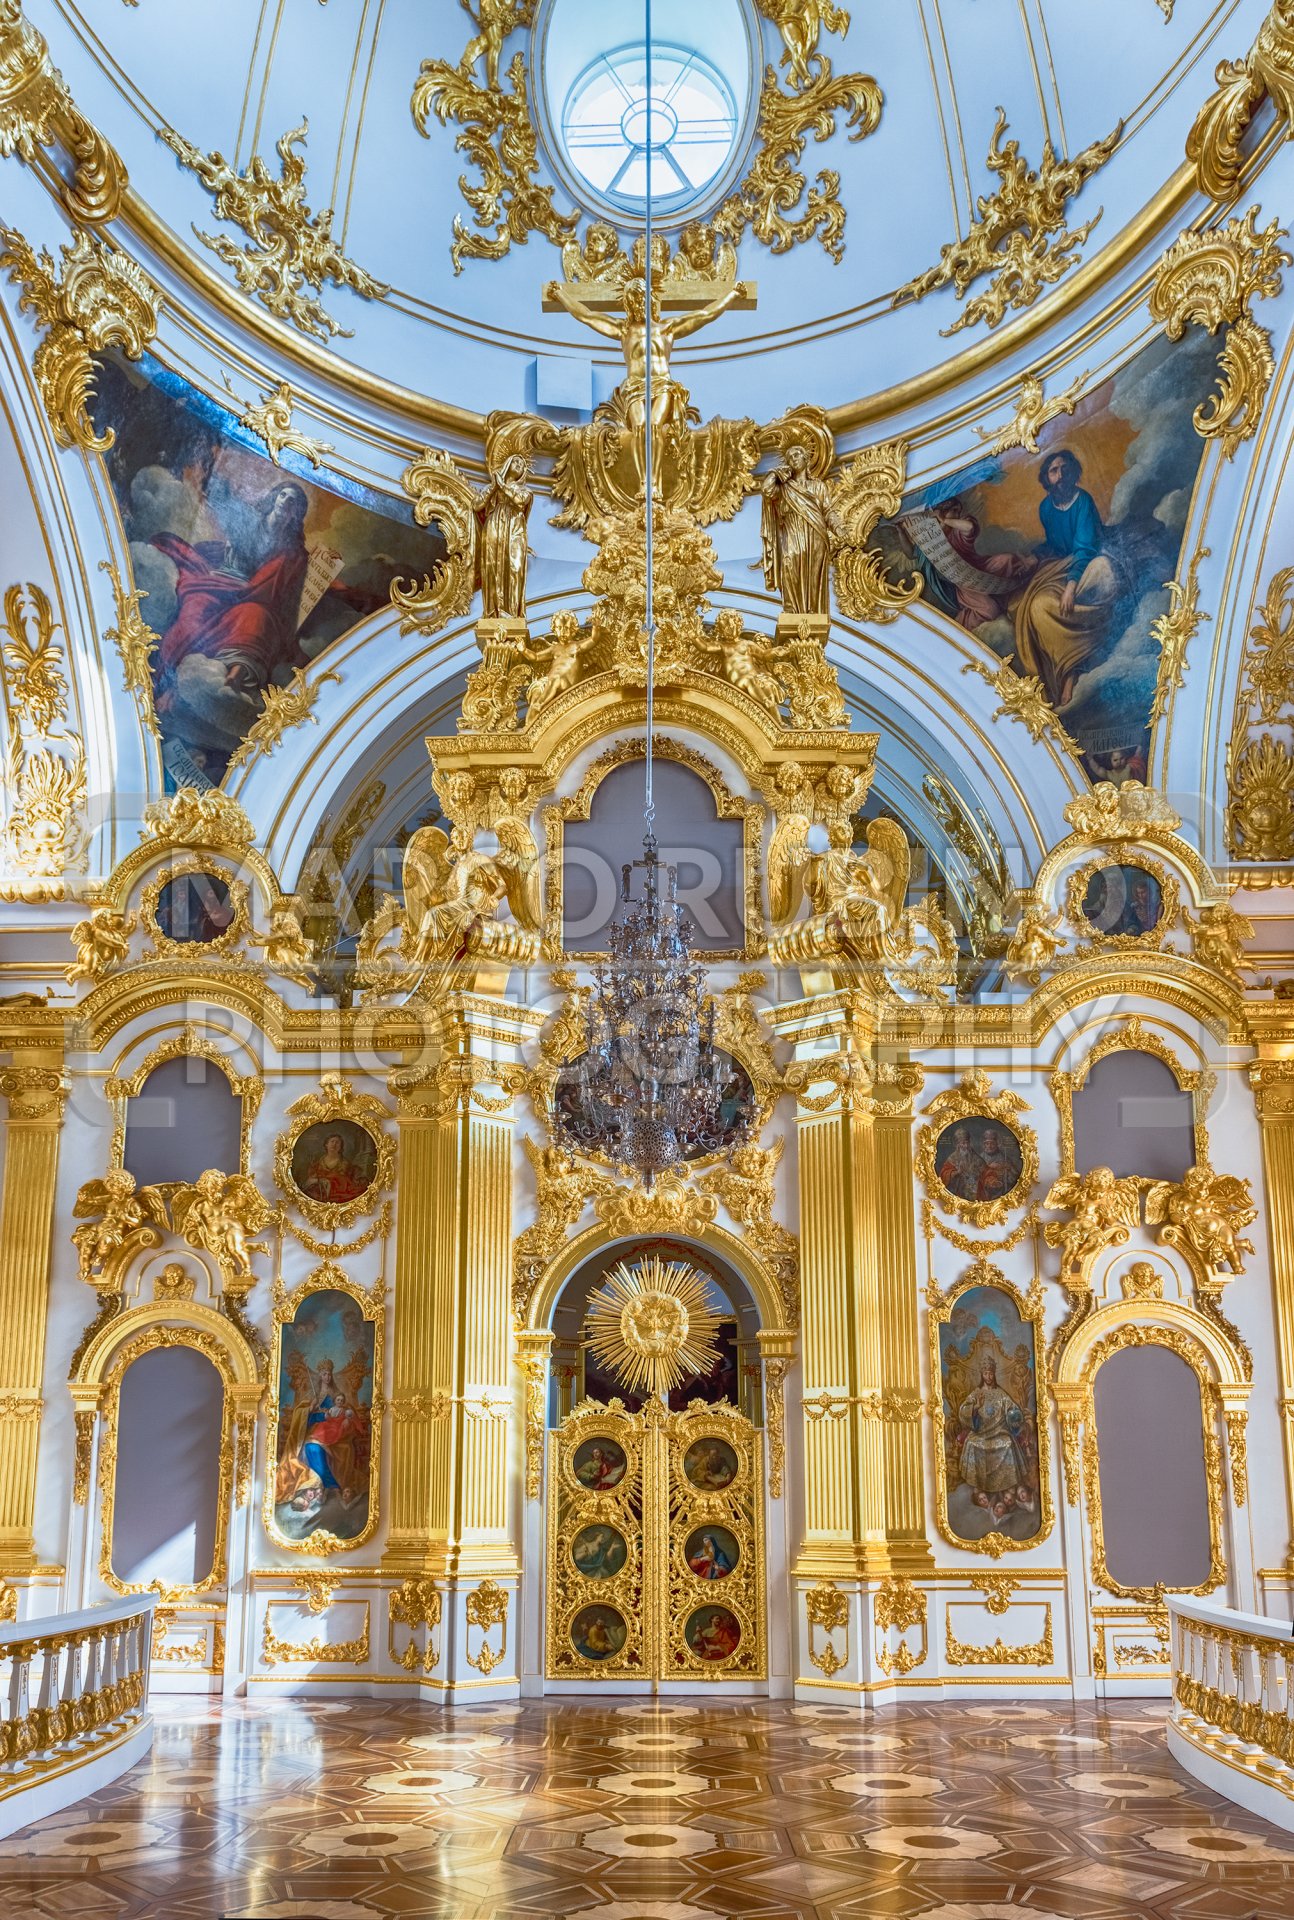 Grand Church of the Winter Palace, Hermitage Museum, St. Petersburg ...